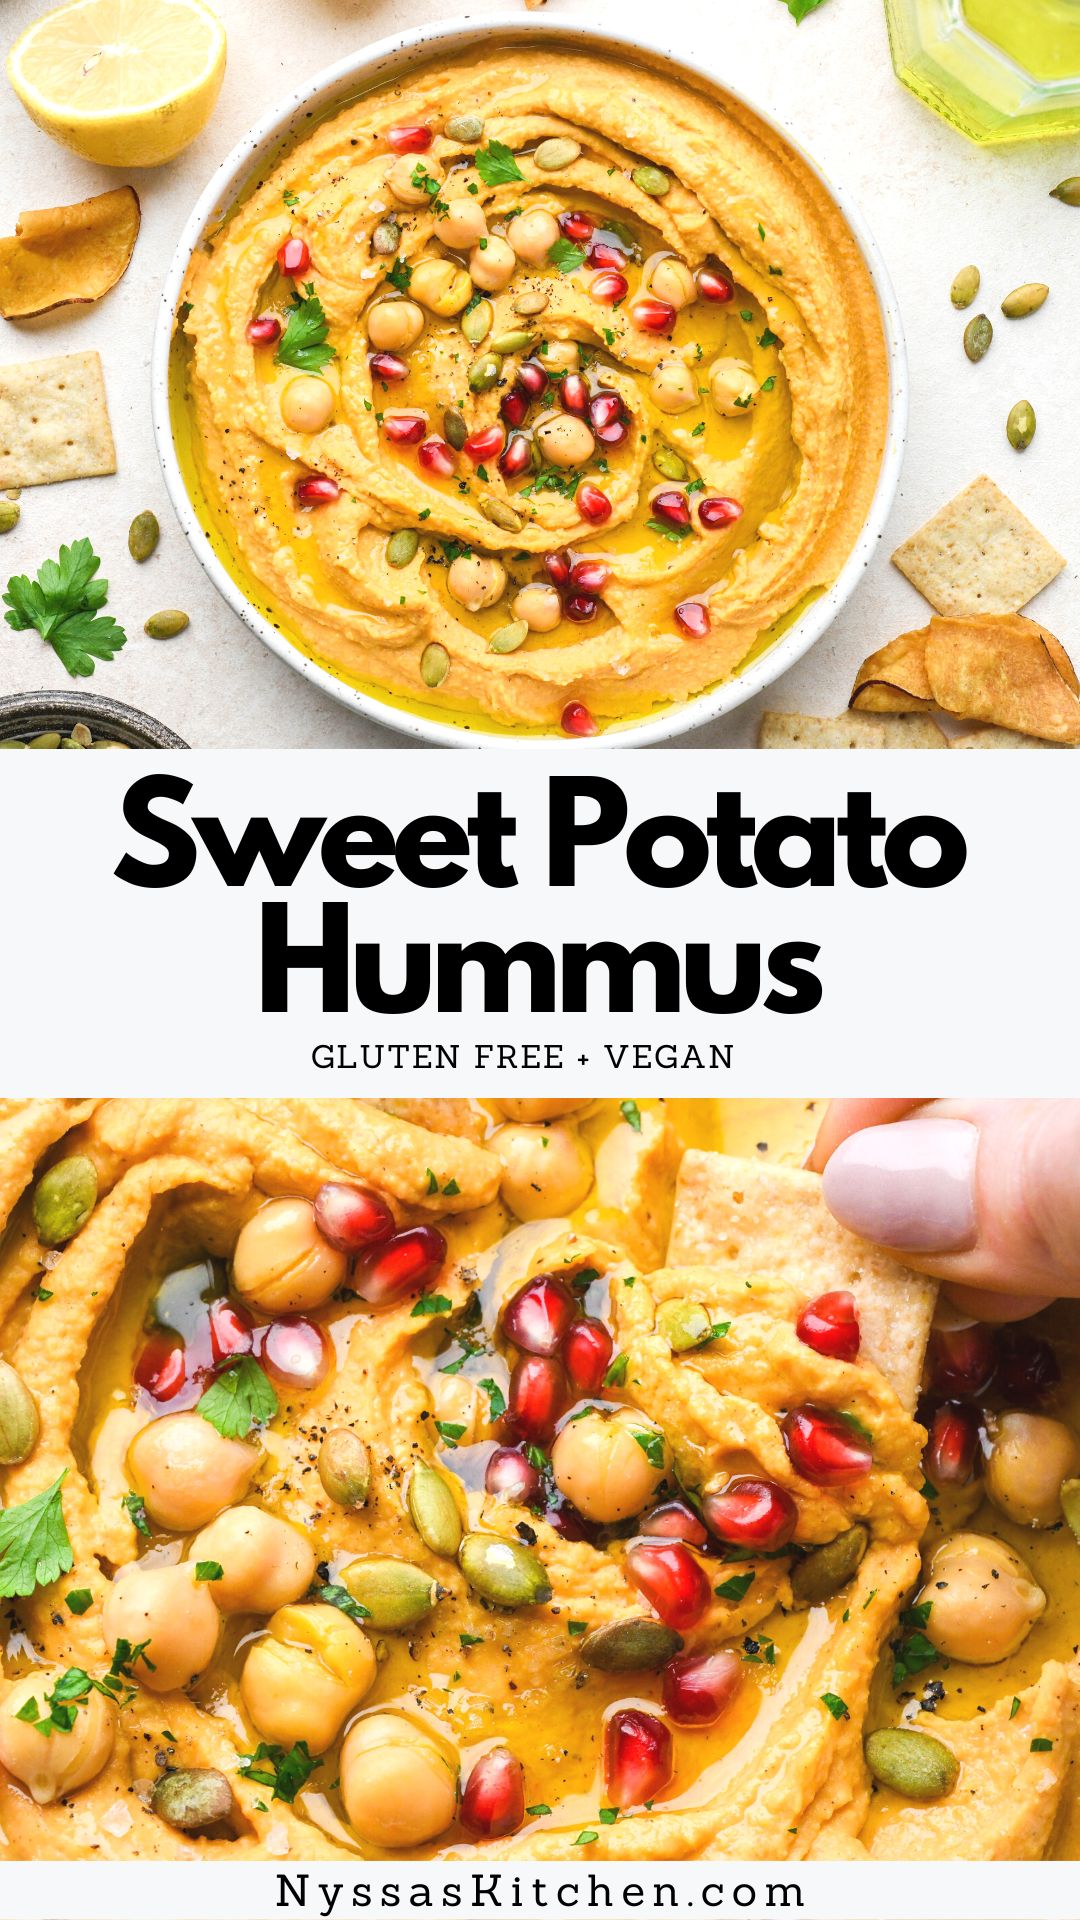 Sweet potato hummus is an extra yummy seasonal twist on a classic hummus recipe that makes the best healthy snack or appetizer for your next get together (or weekly meal prep)! Made with chickpeas, roasted sweet potatoes, a blend of flavorful spices, tahini, and lemon juice. A perfect snack for dipping your favorite crackers and veggies. Gluten free, vegan, dairy free.